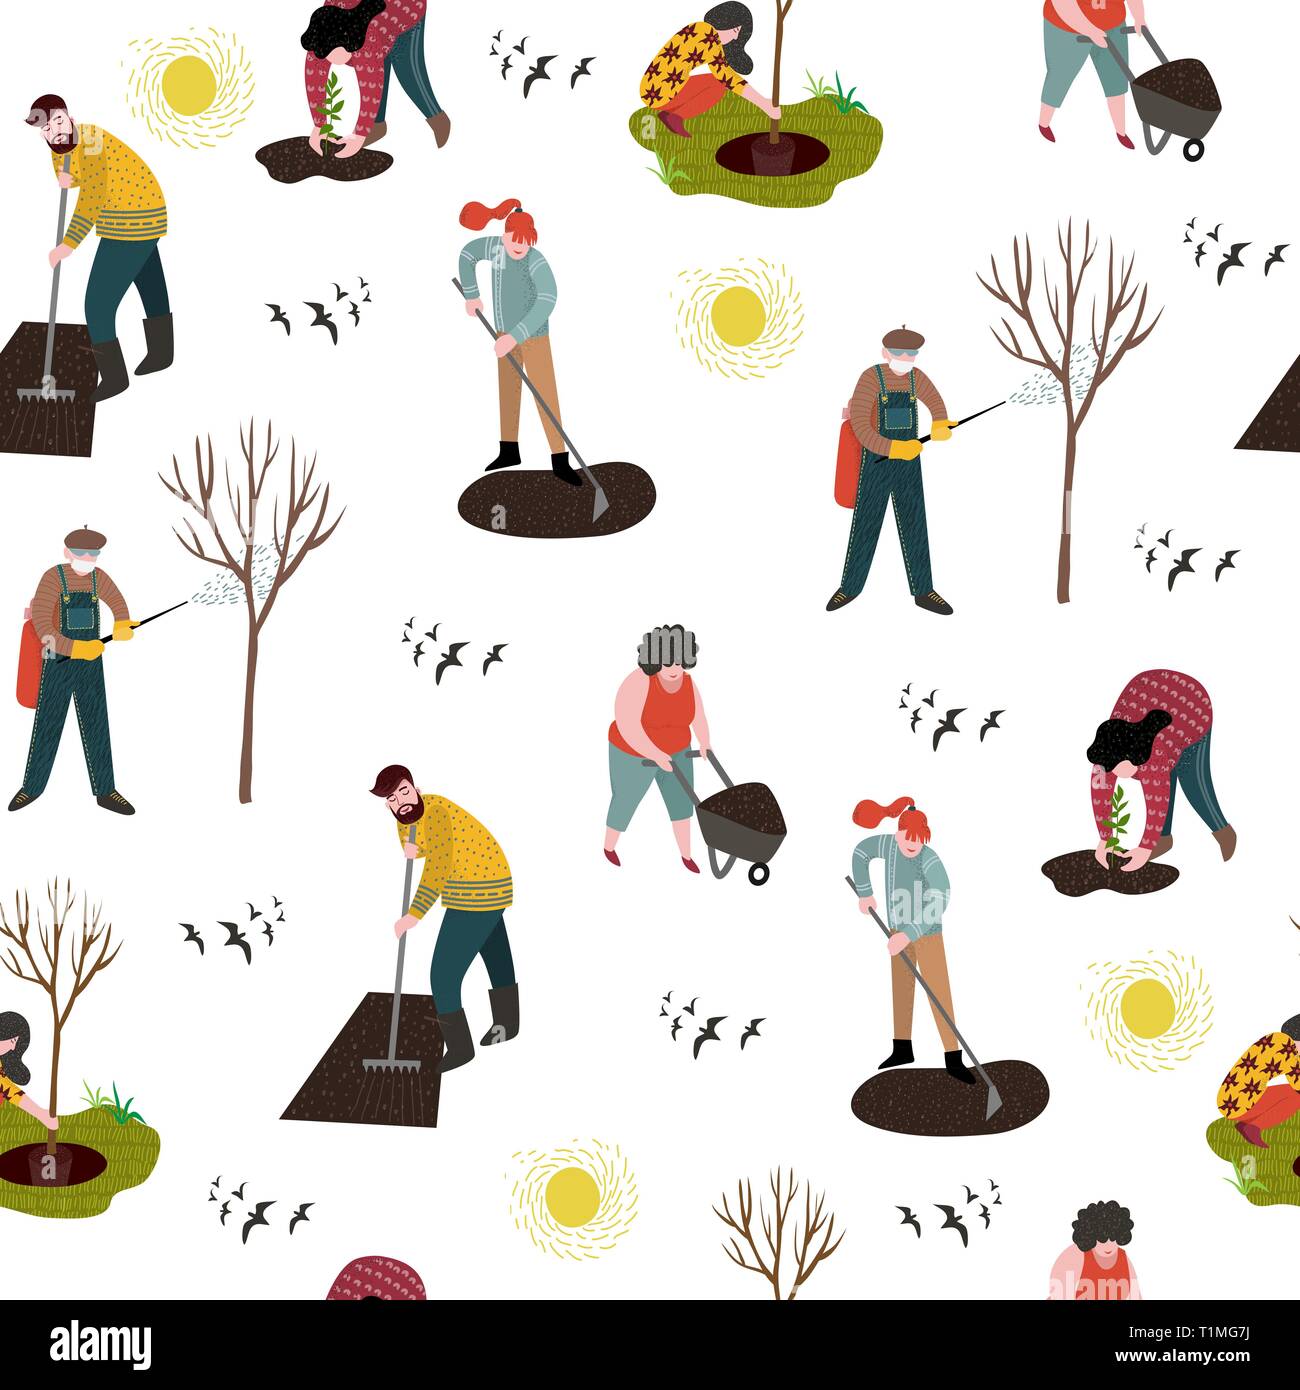 Seamless pattern with people working in the garden over planting, developing the land and treating trees from pests. Vector Stock Vector